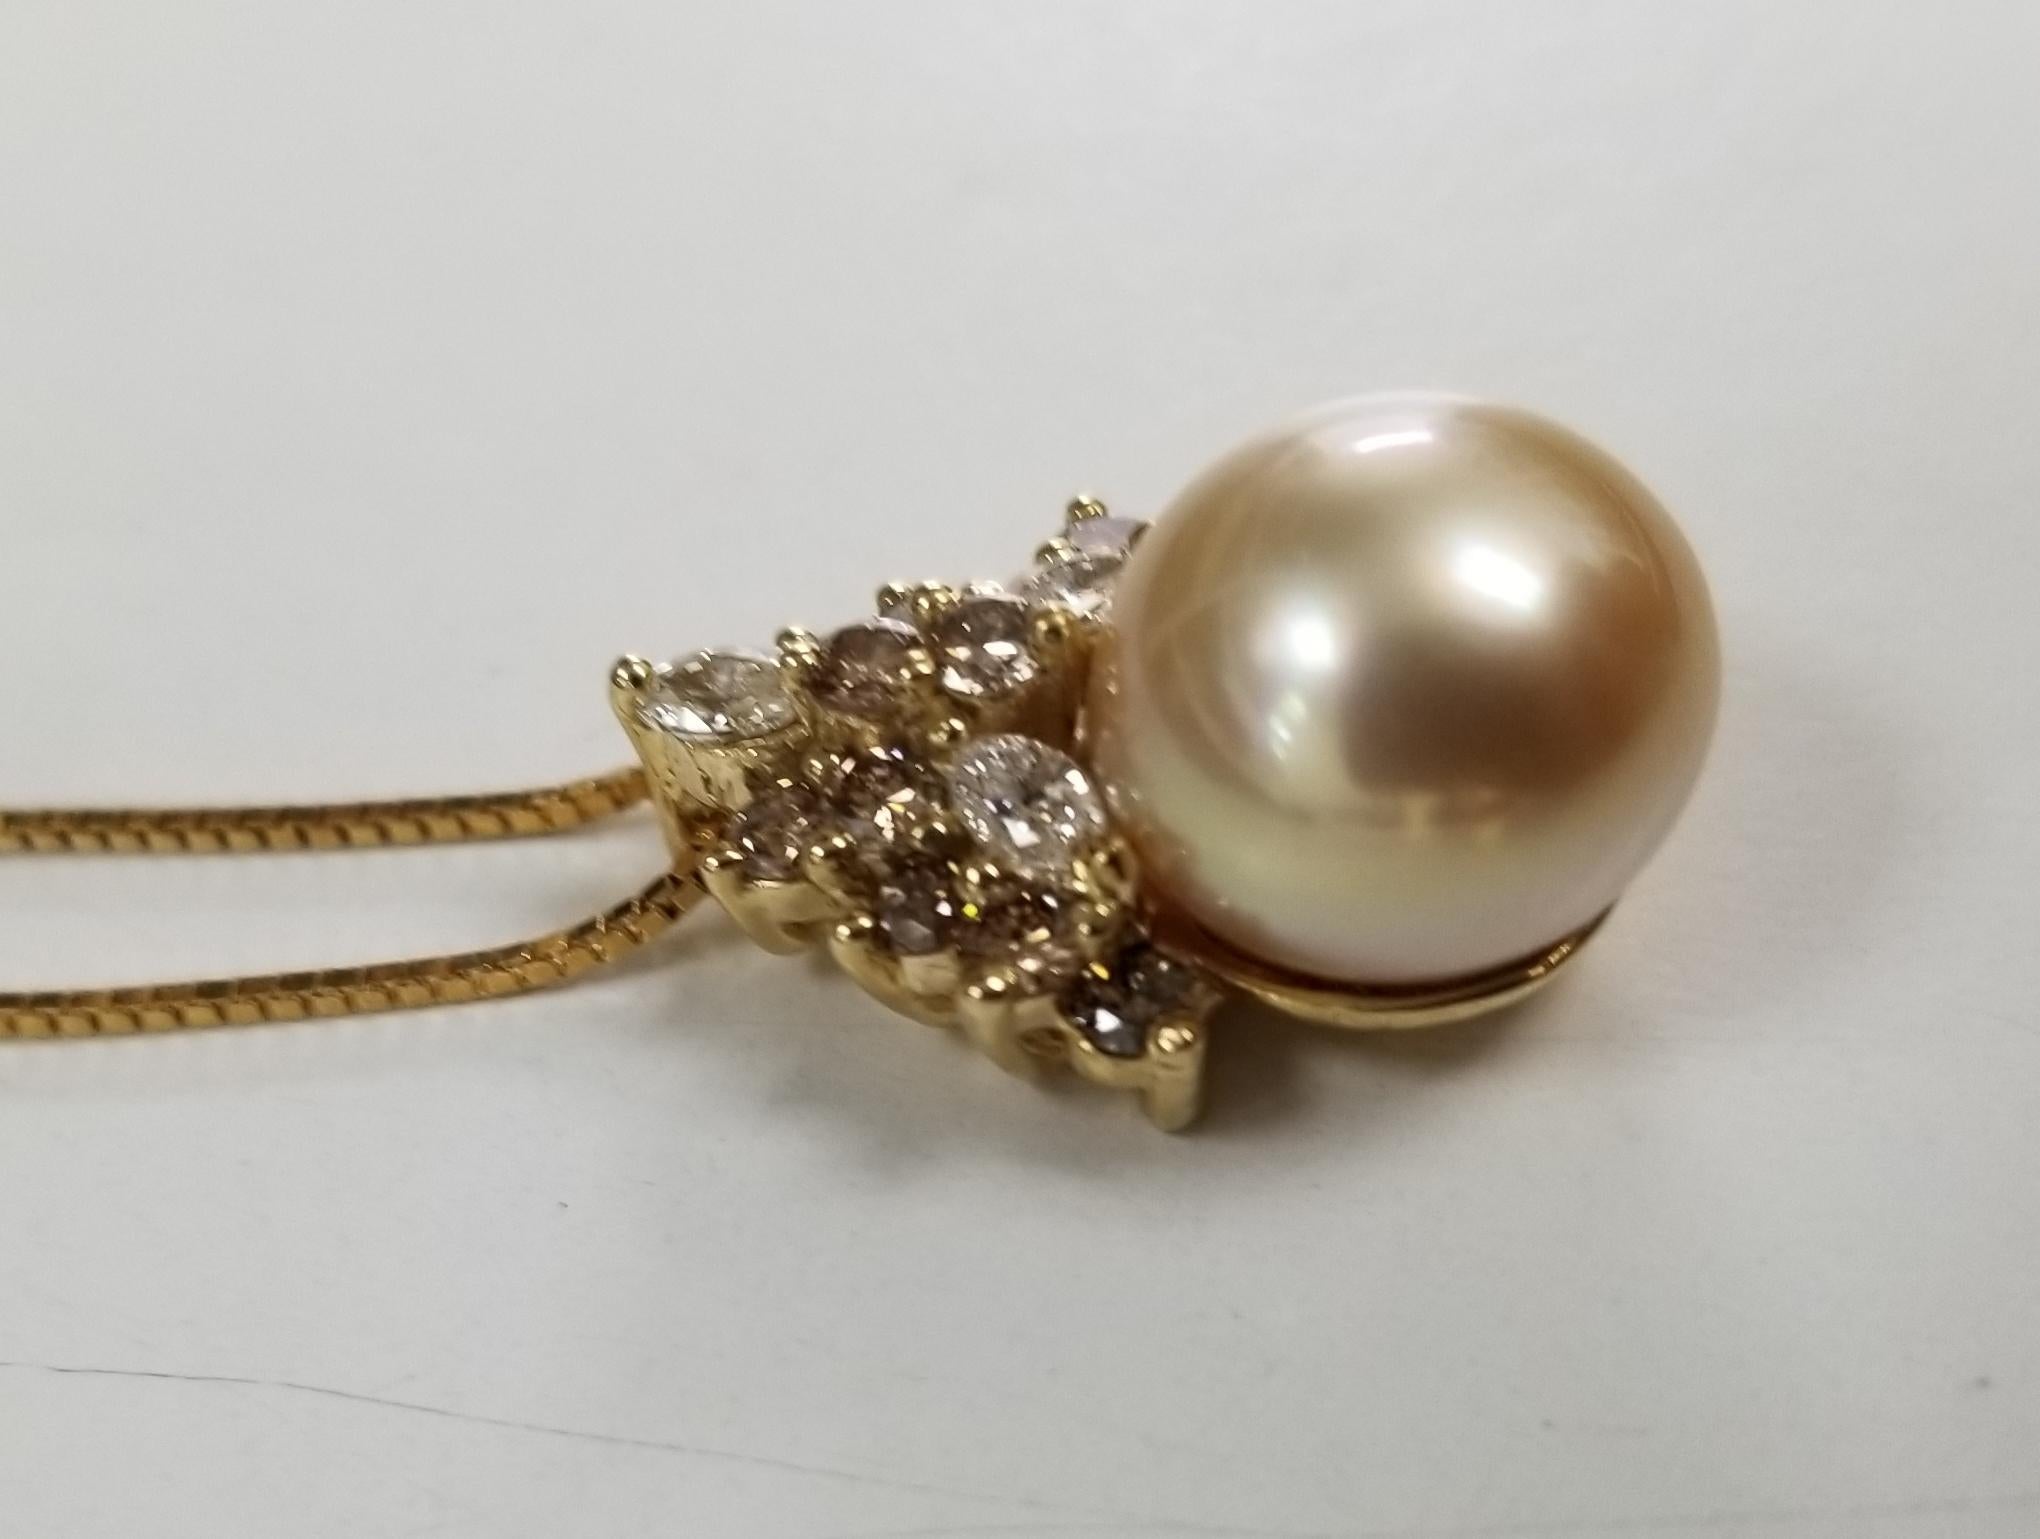 14k yellow gold South Sea Golden Pearl with brown and white diamonds, containing 1-11.06mm South Sea Golden Pearl with 3 white diamonds weighing .32pts. and 12 brown diamonds weighing .75pts. on a 18 inch box chain. 